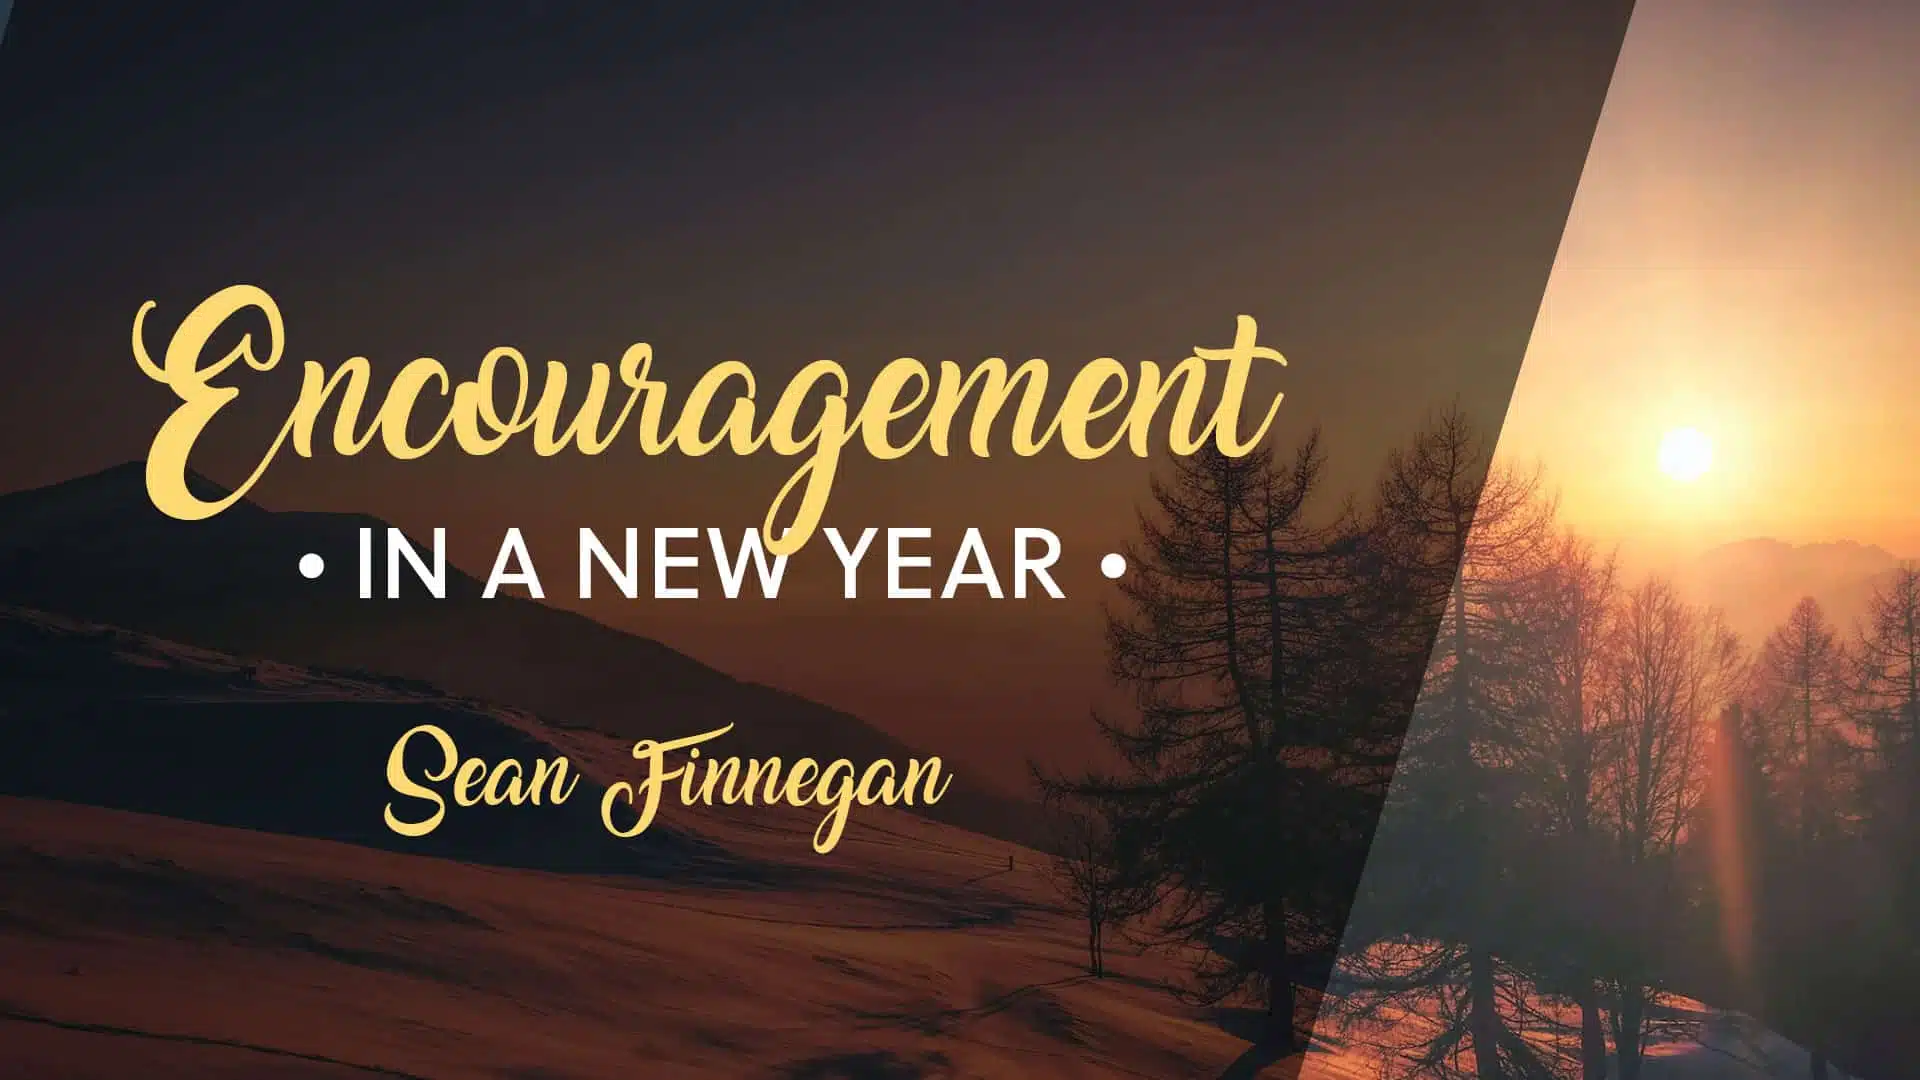 Encouragement in a New Year